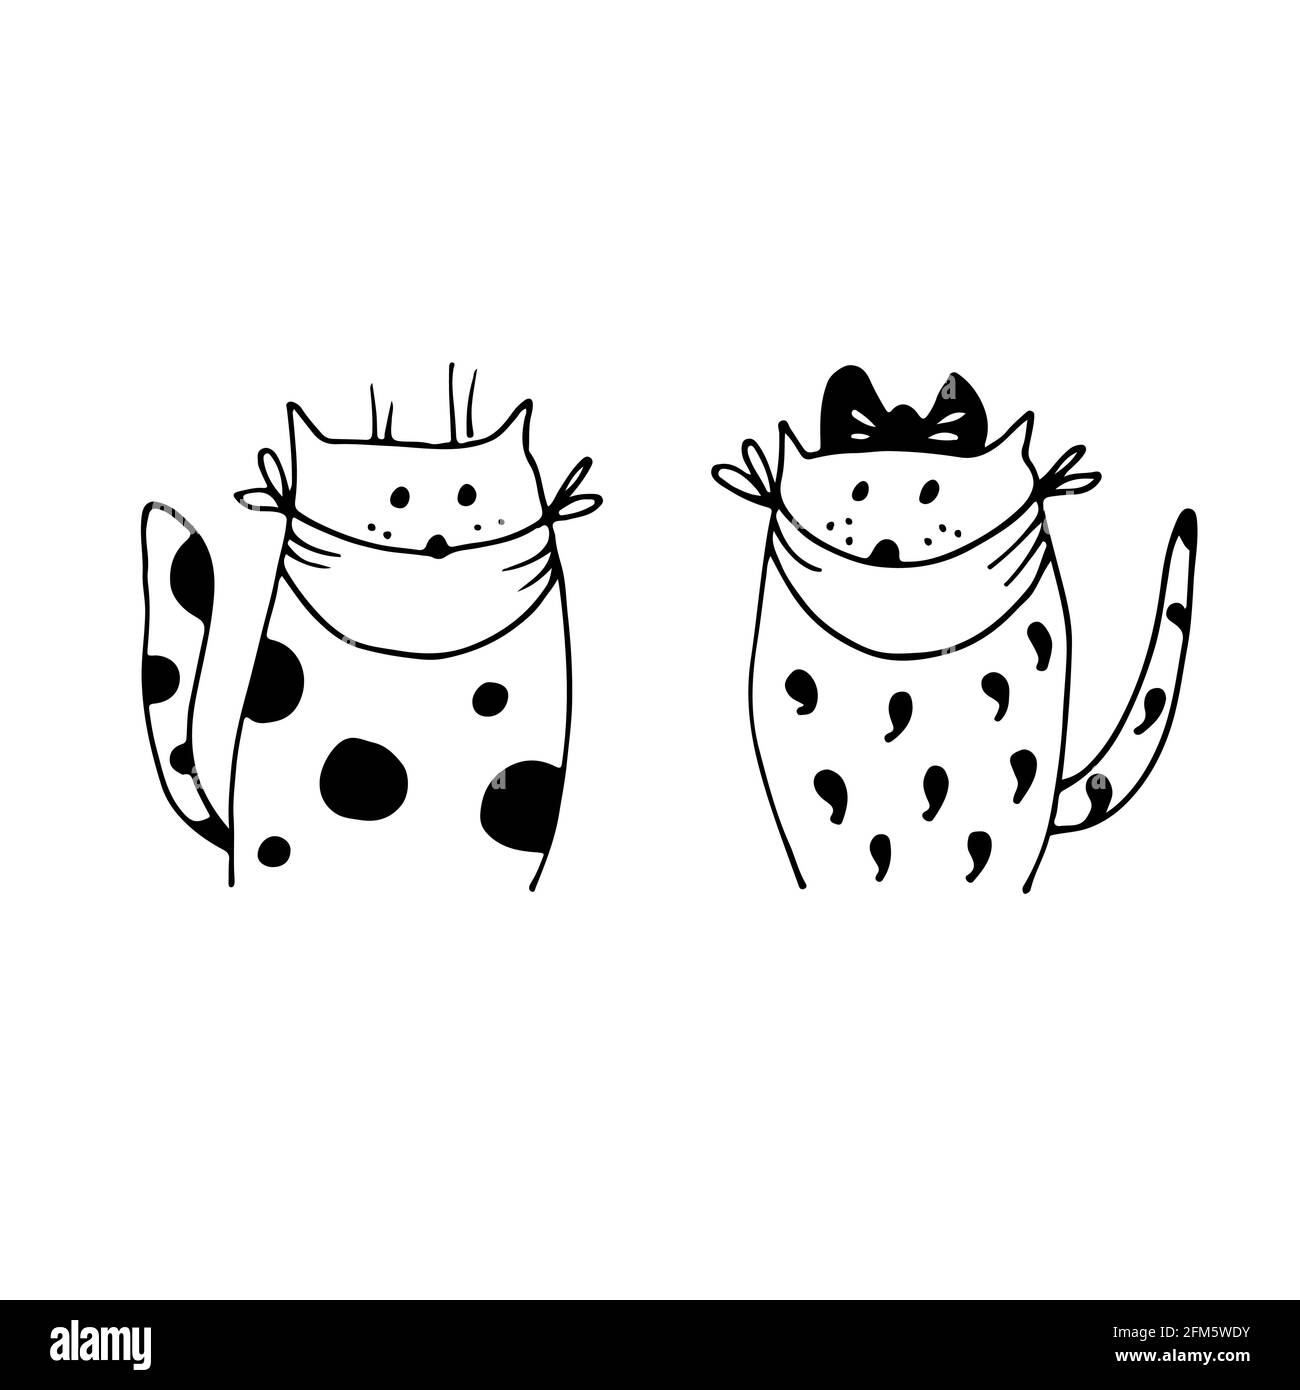 Two cats in face masks vector illustration, isolated on white background Stock Vector